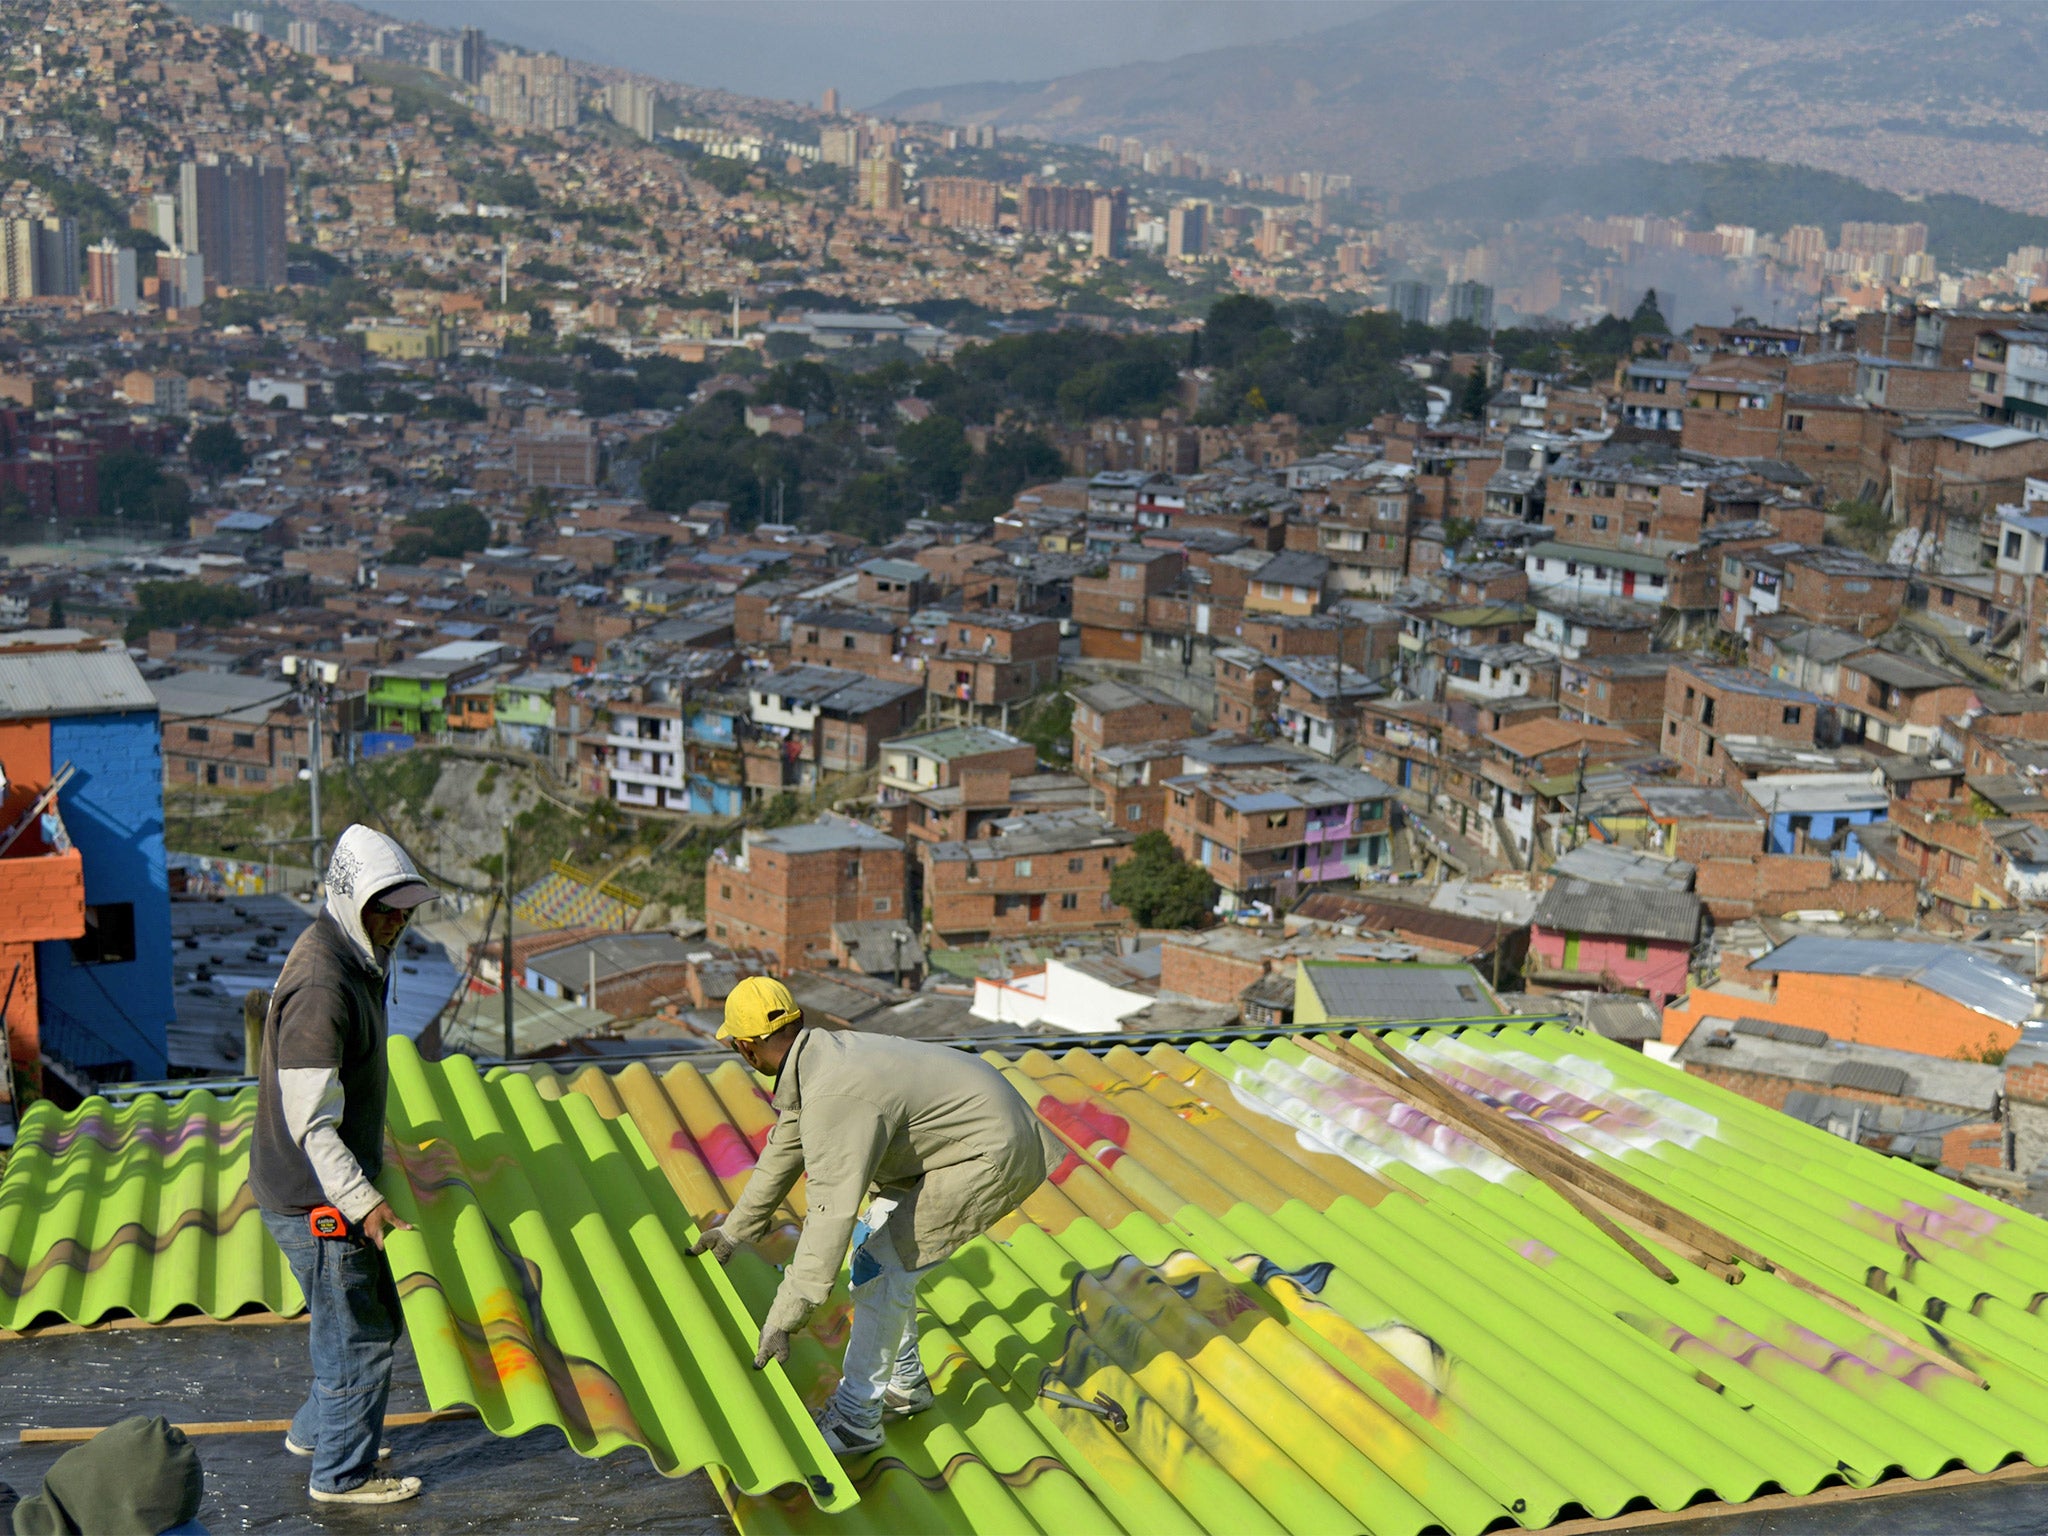 Just 20 years ago, Medellin was the most murderous city in the world. But today it is being transformed with the community reclaiming public spaces